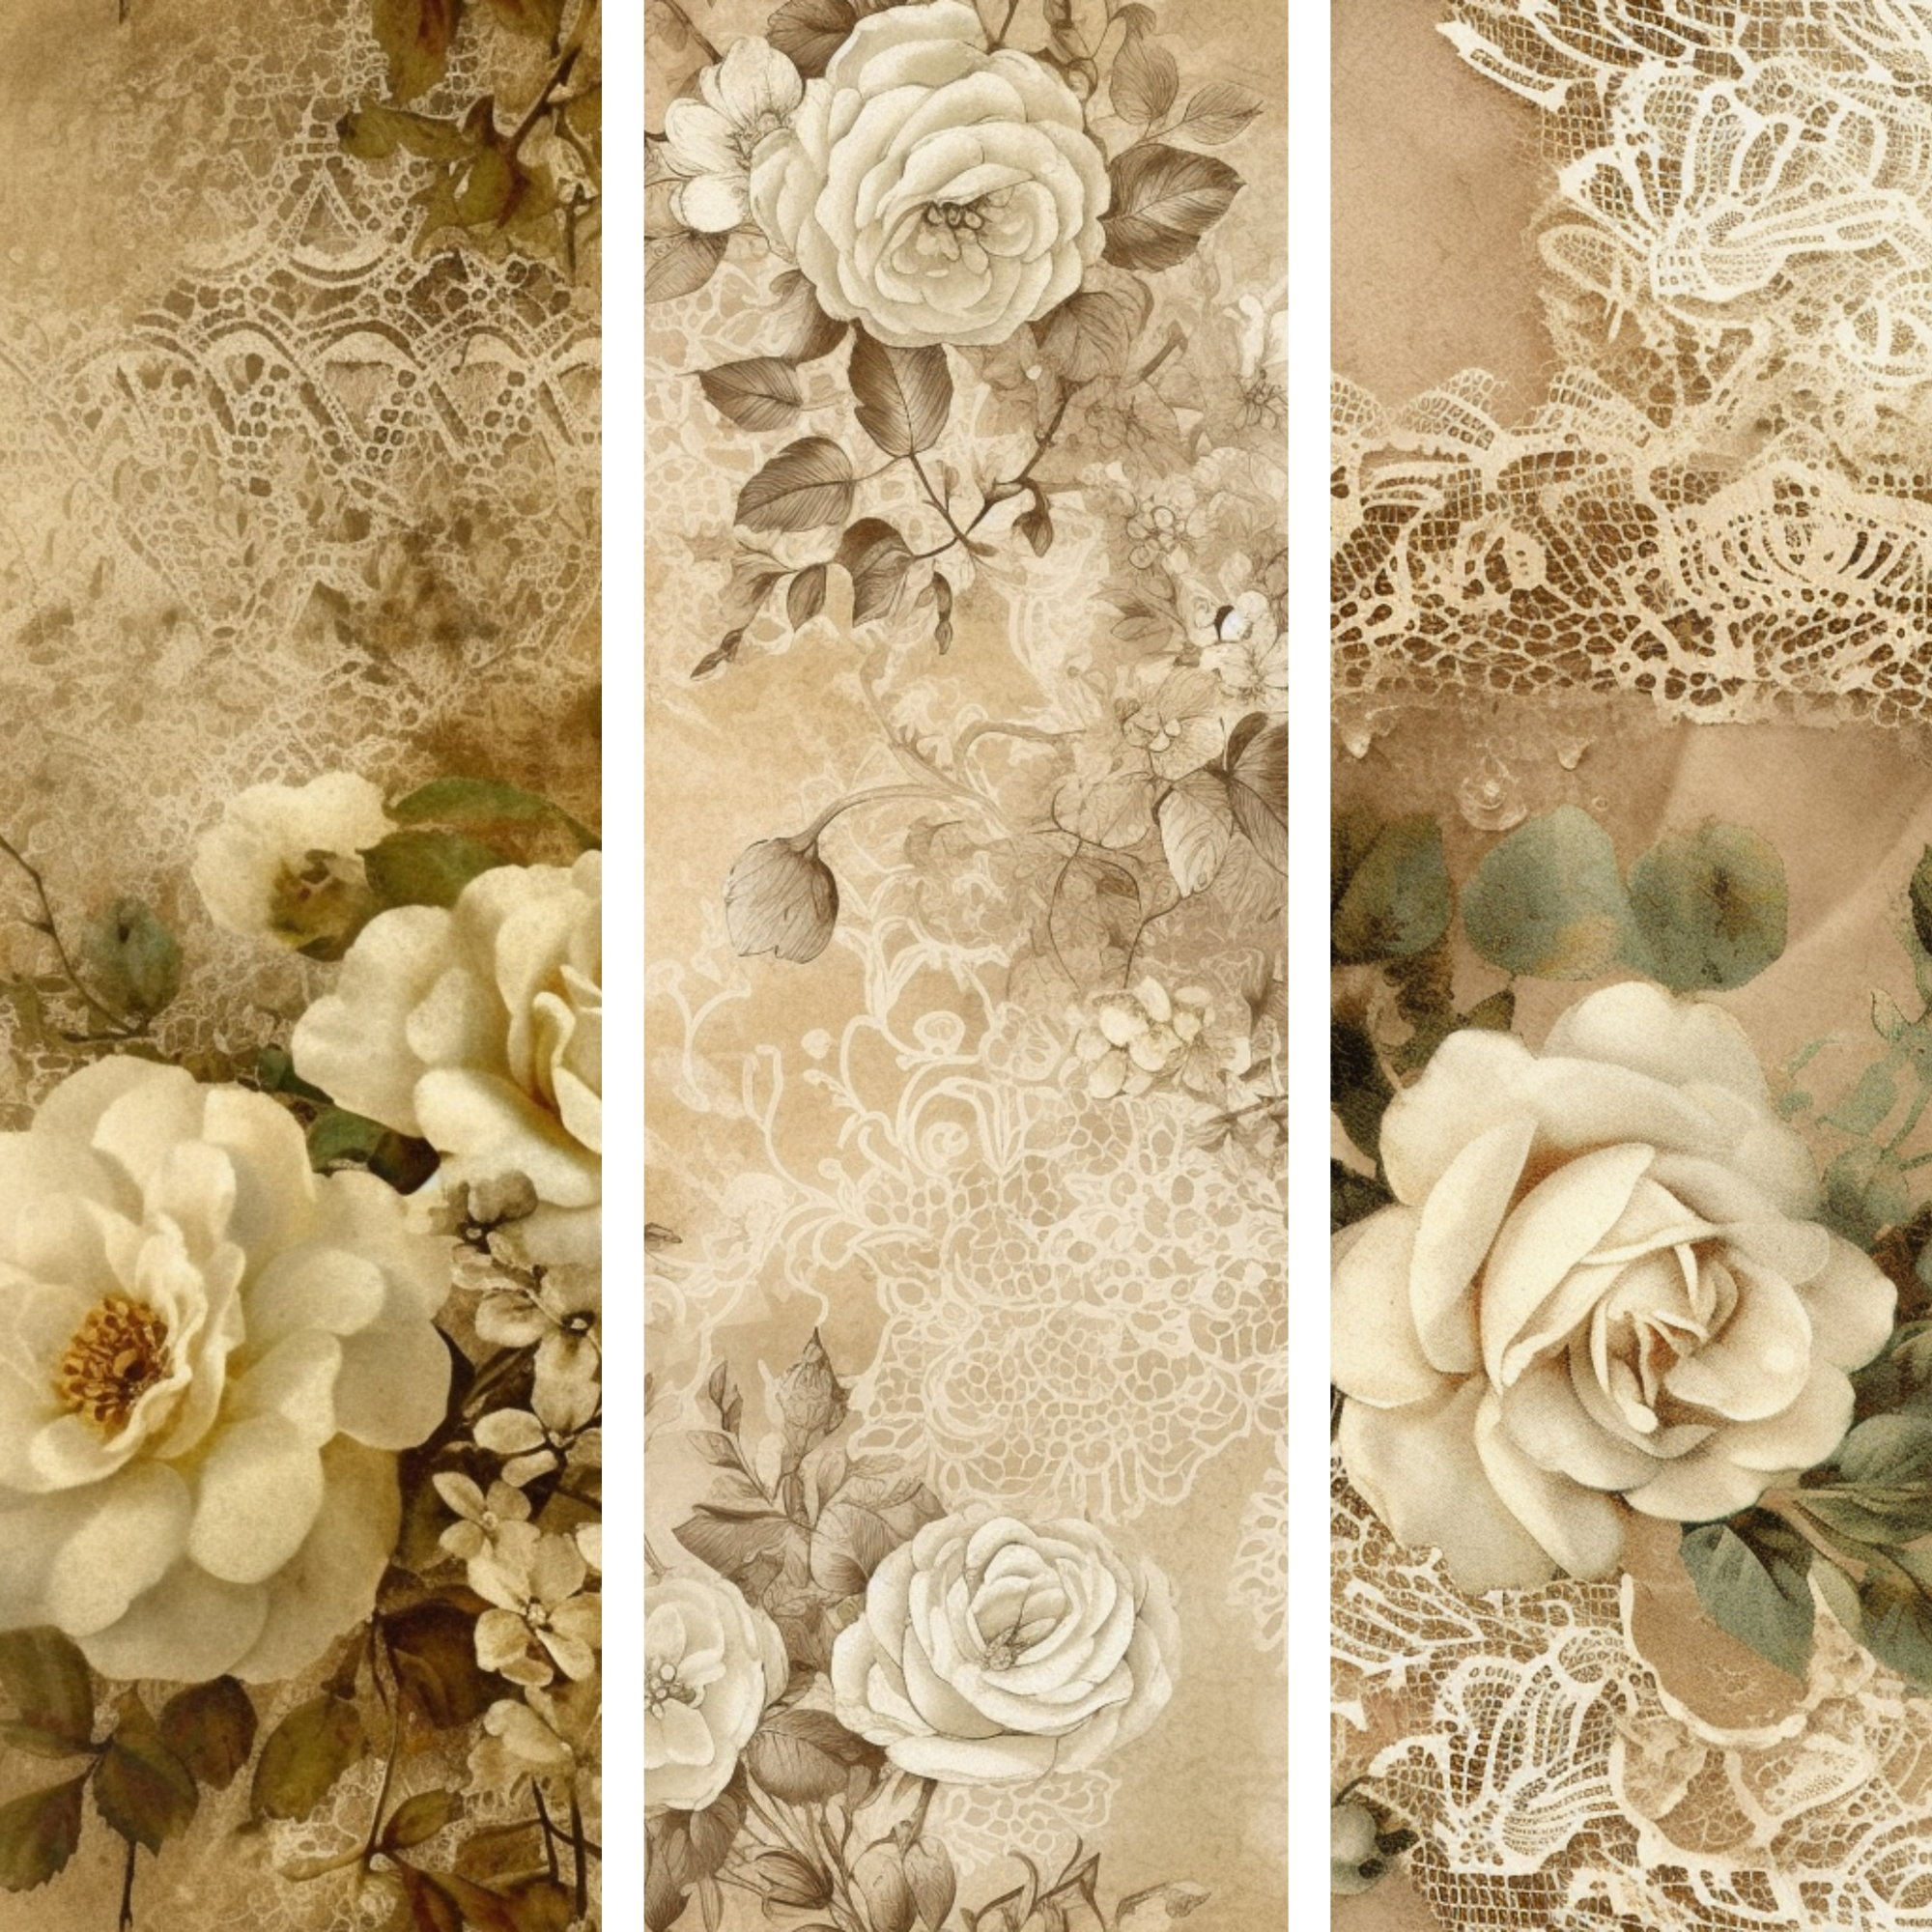 Scrapbook Digital Paper Seamless Vintage Flowers and Lace Digital Background Digital Wedding Floral Lace Digital Wallpaper invitations sublimation wall art wrapping paper